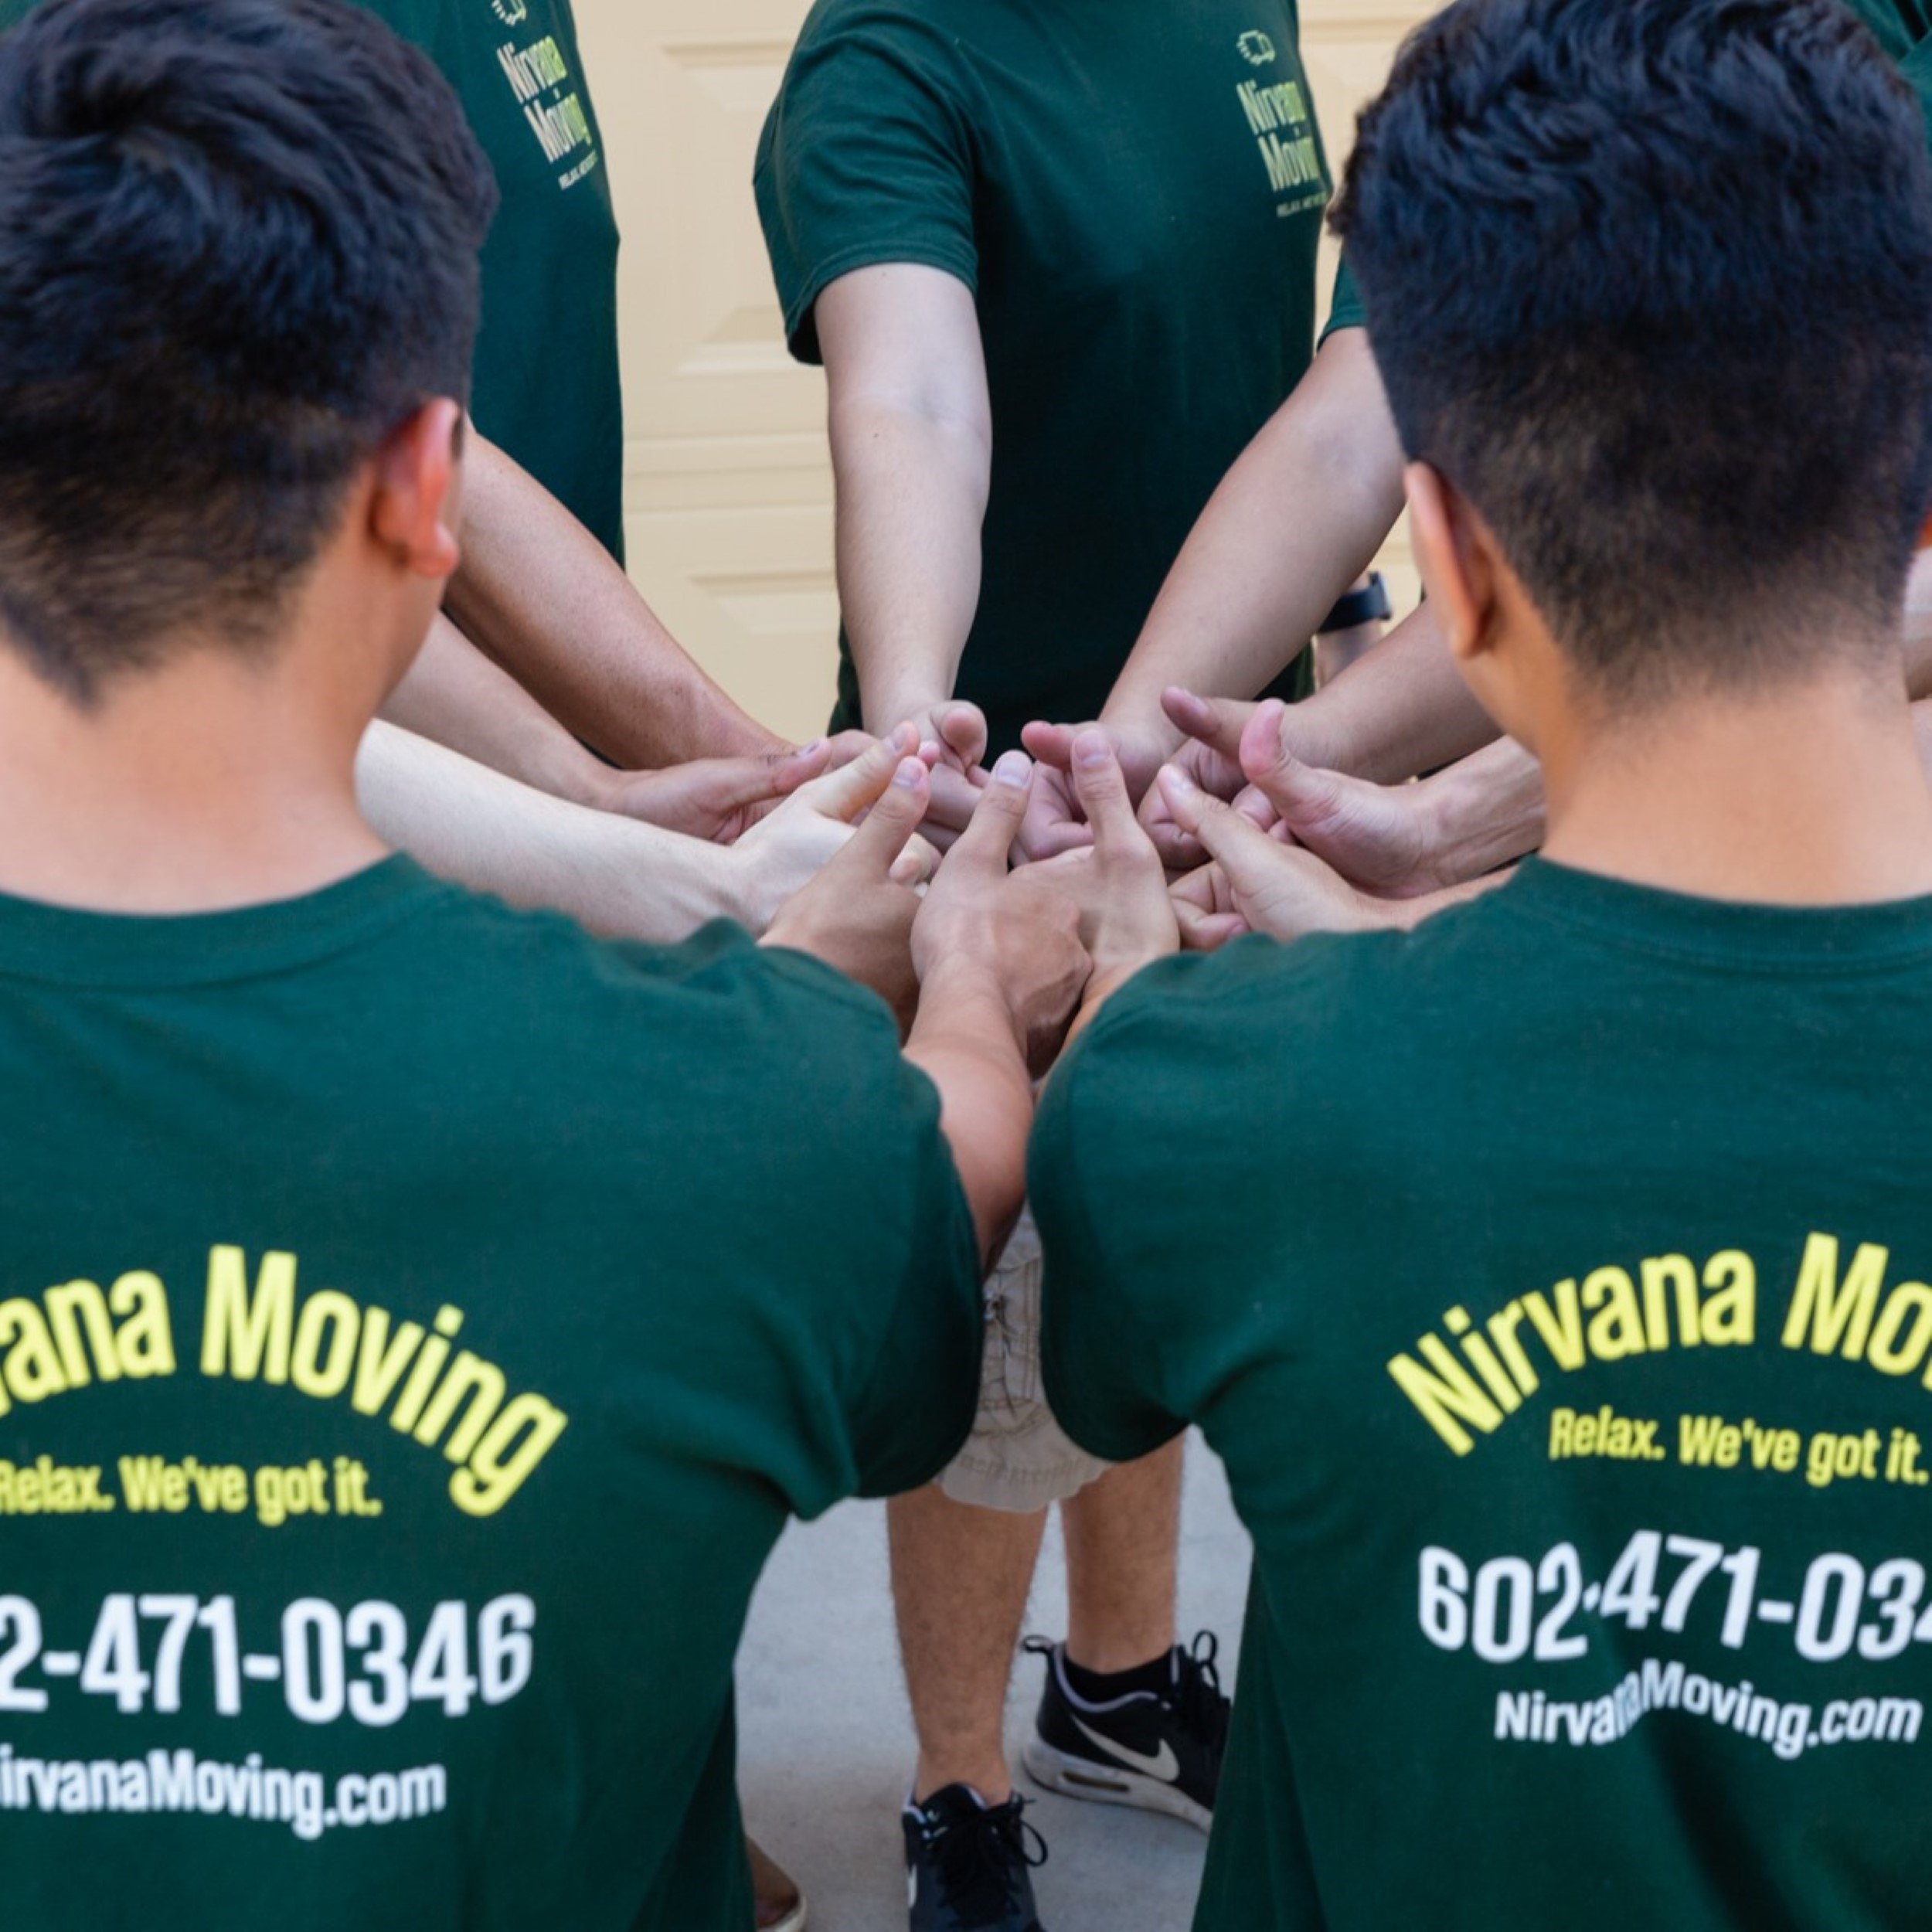 Local Peoria Movers